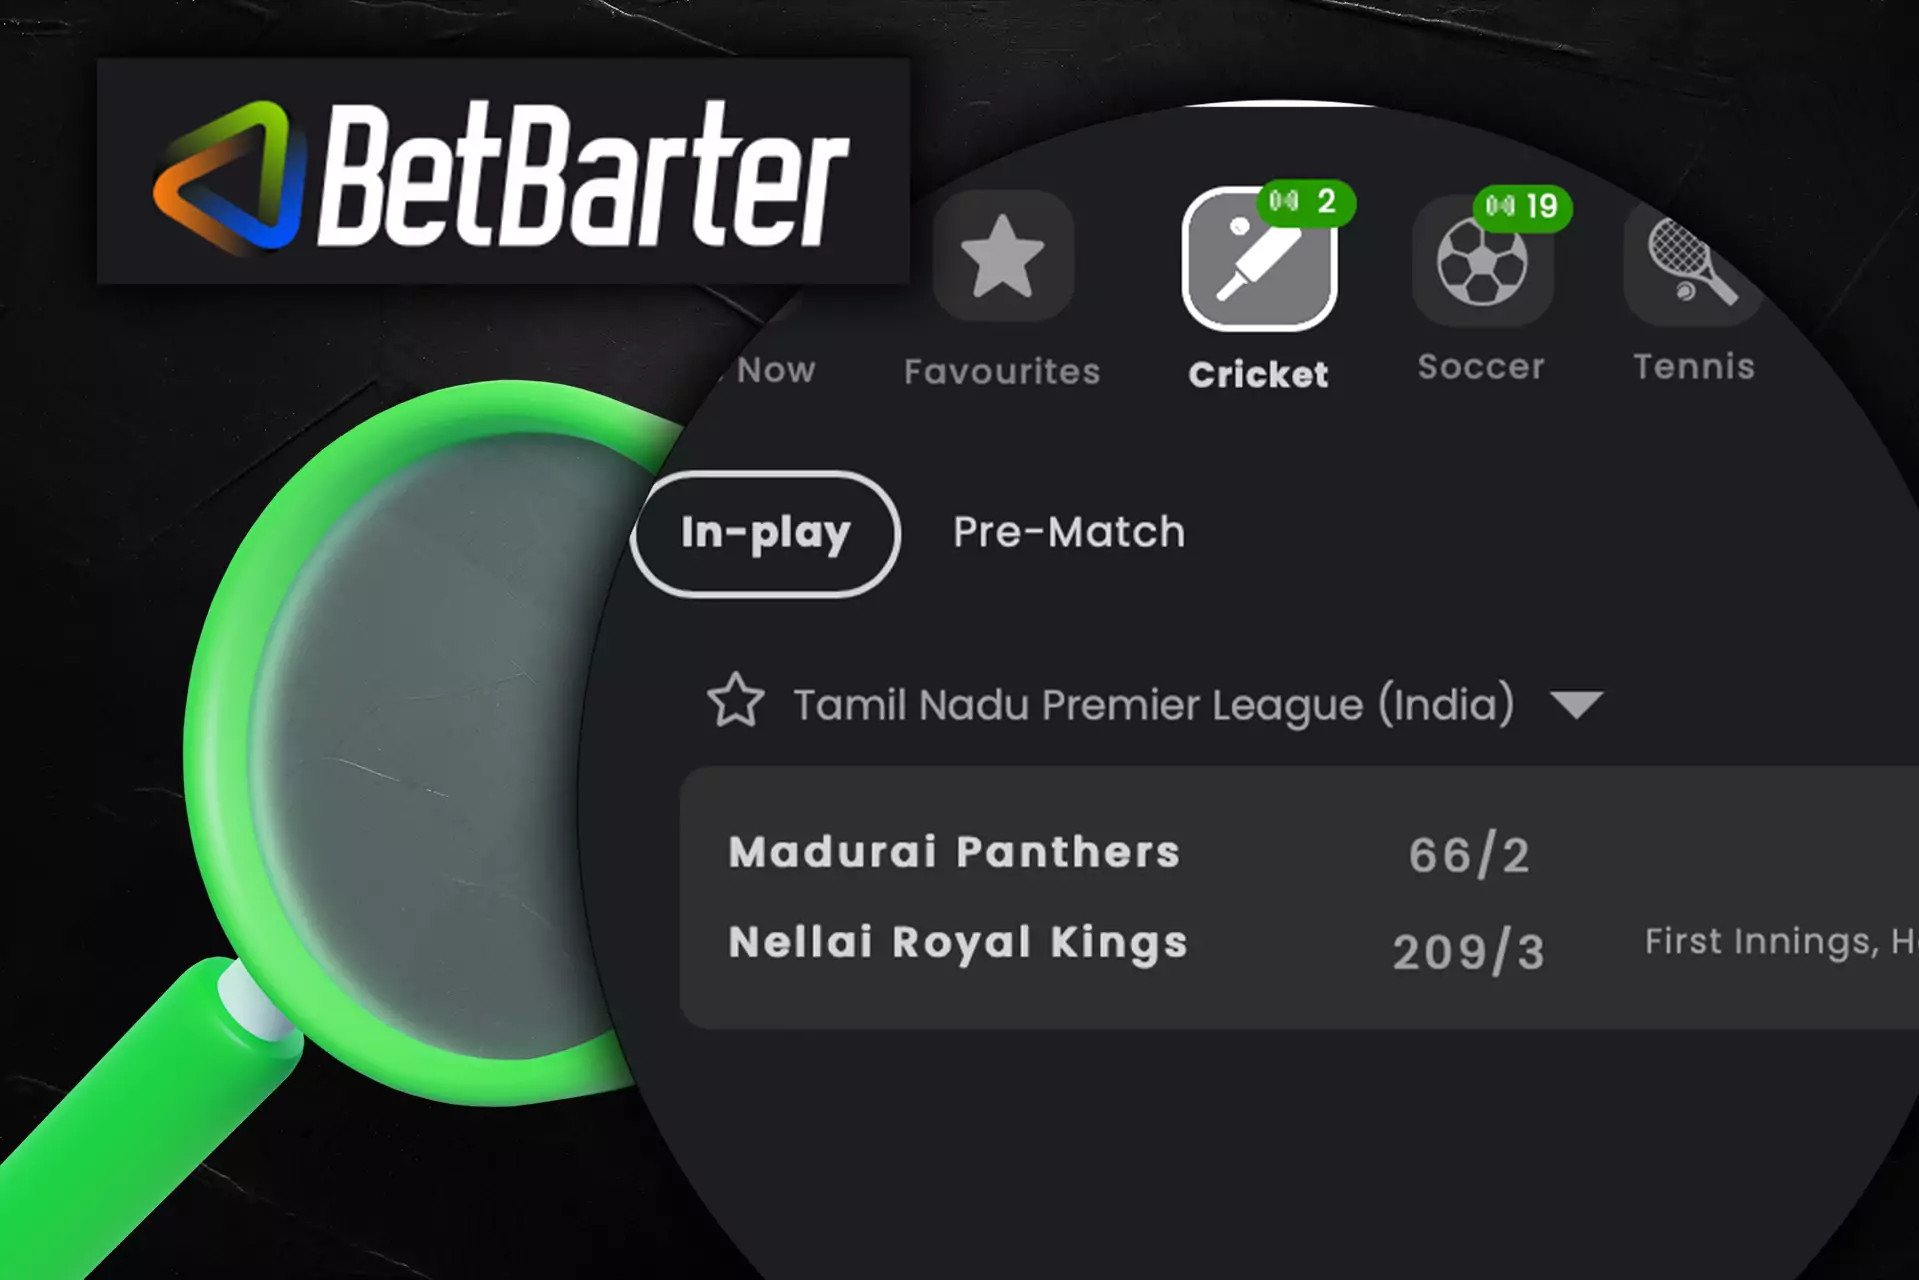 You can place bets beforehand in the line section on the Betbarter site.